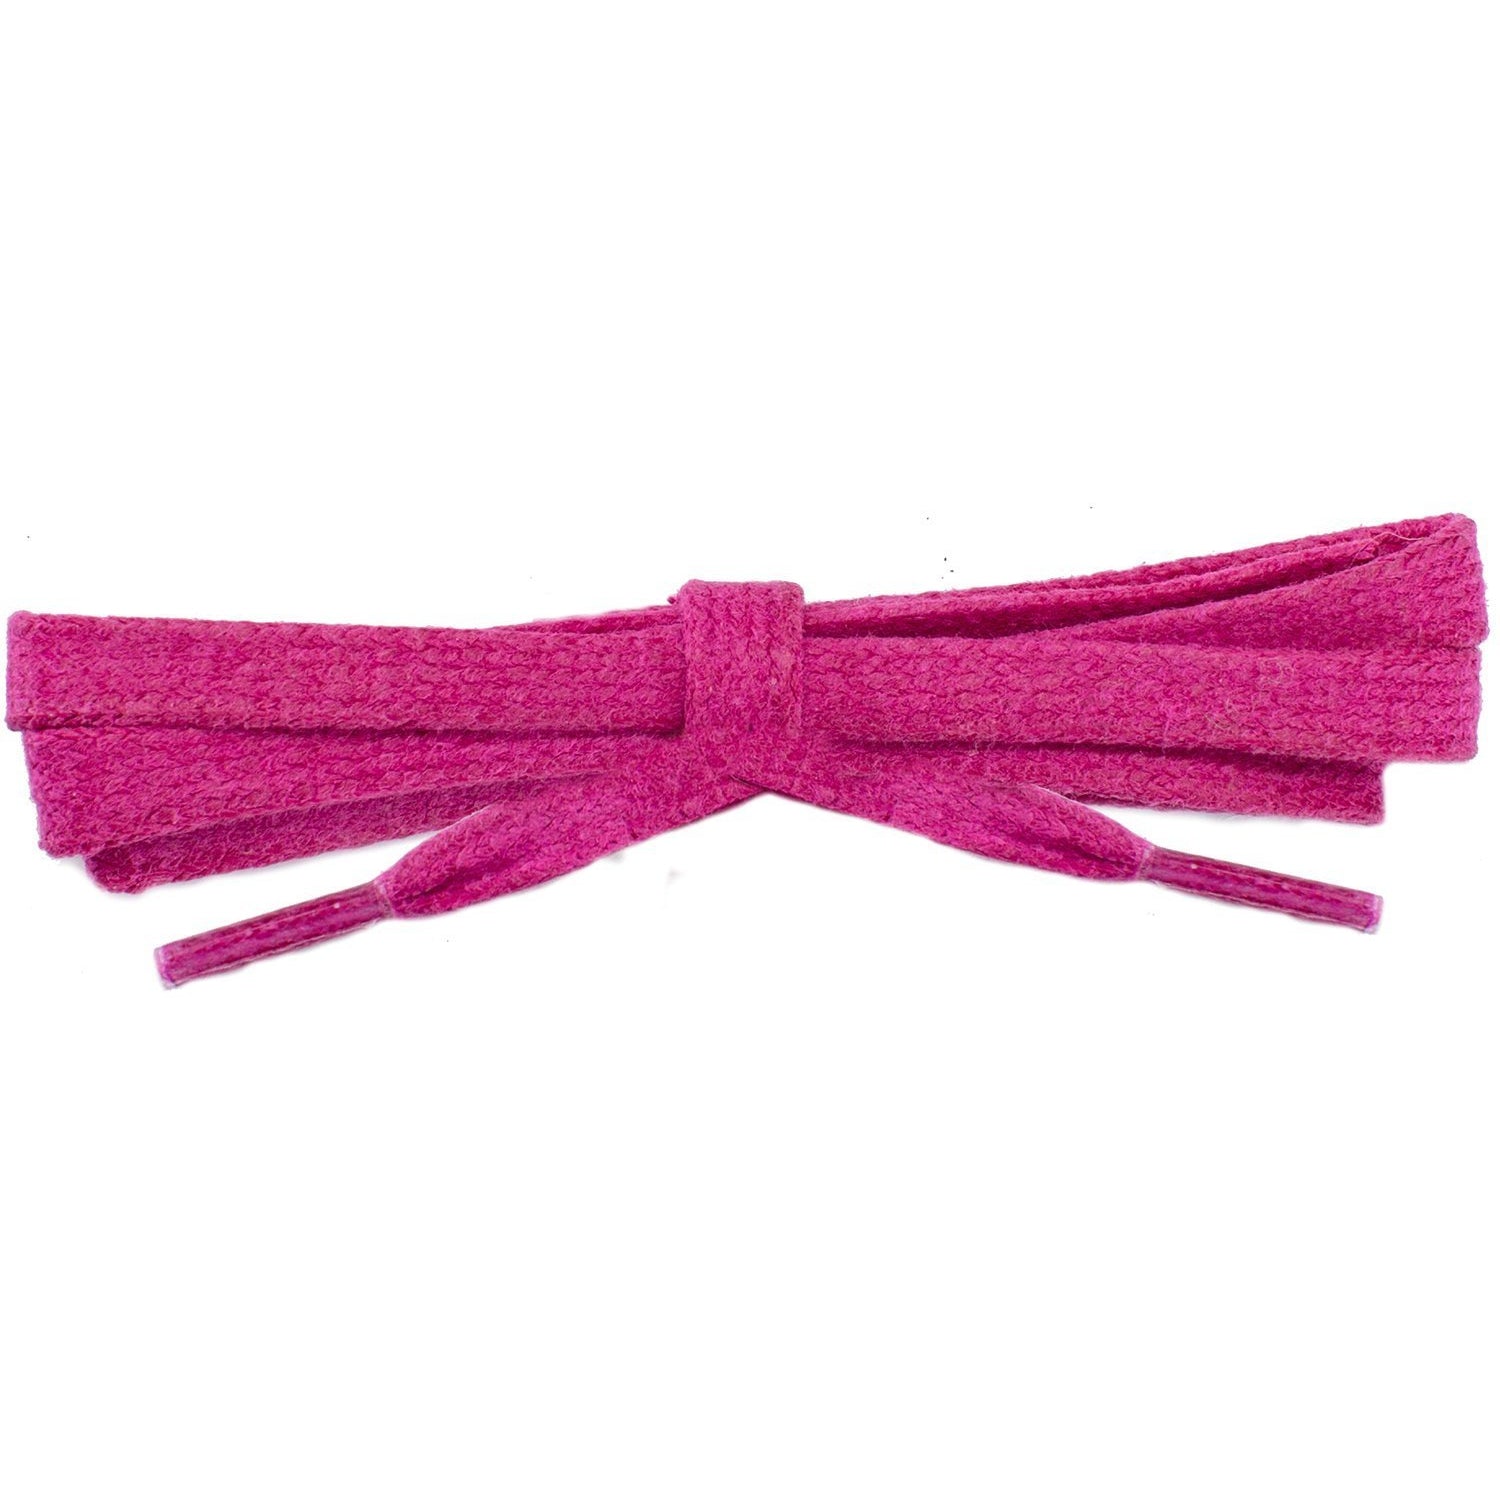 Wholesale Waxed Cotton Flat DRESS Laces 1/4'' - Fuchsia Red (12 Pair Pack) Shoelaces